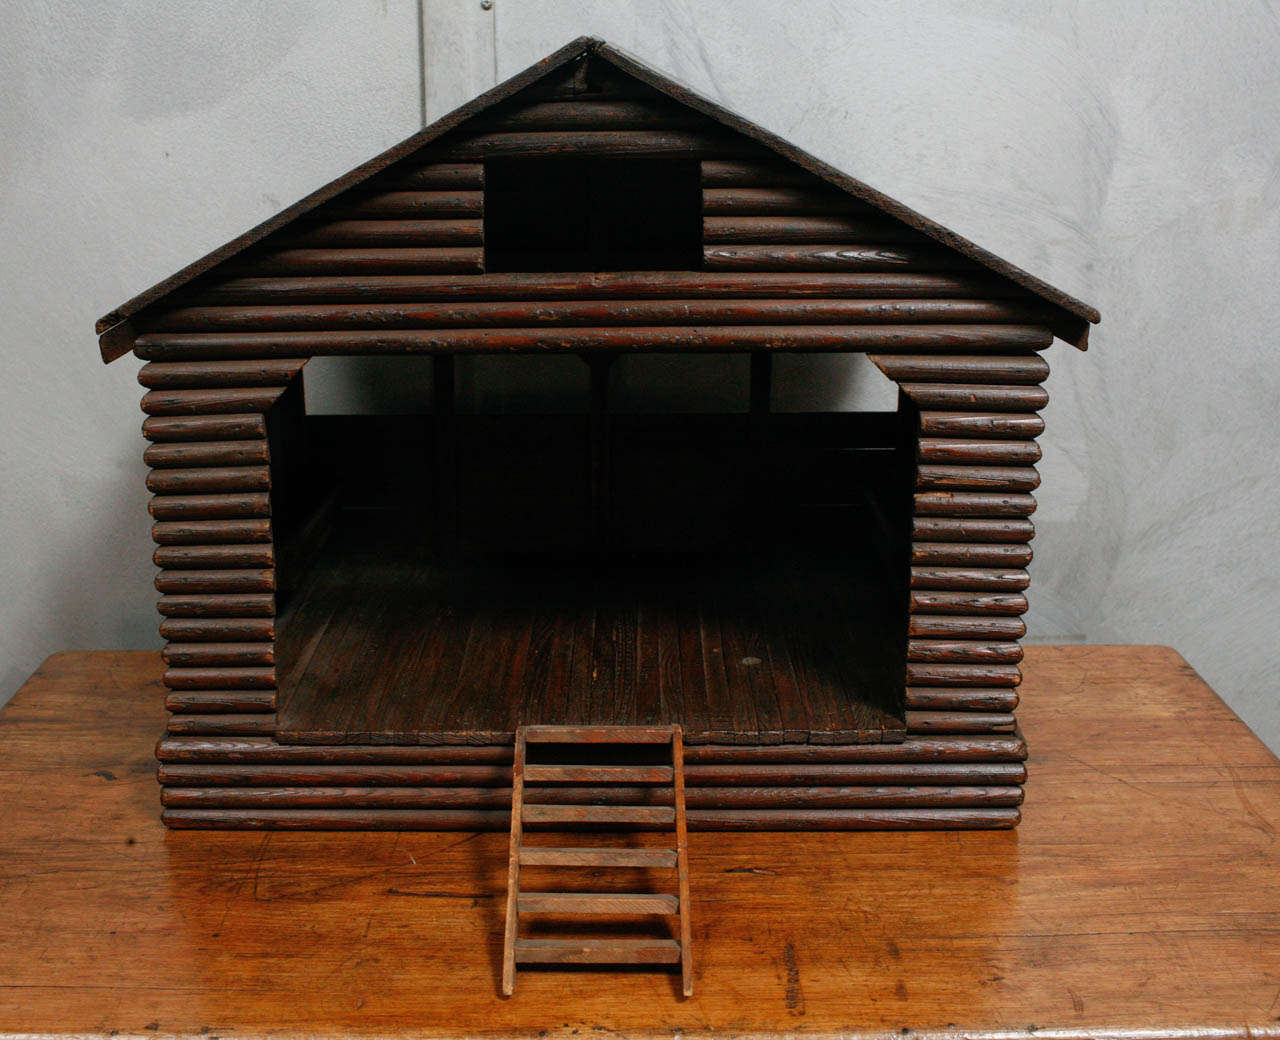 This is a sweet little horse stable model made with precious details. There is a mounted feeding trough below a red glass window at the side, a horse ladder at the front, and windows at the back at the height of a proportioned group of horses to